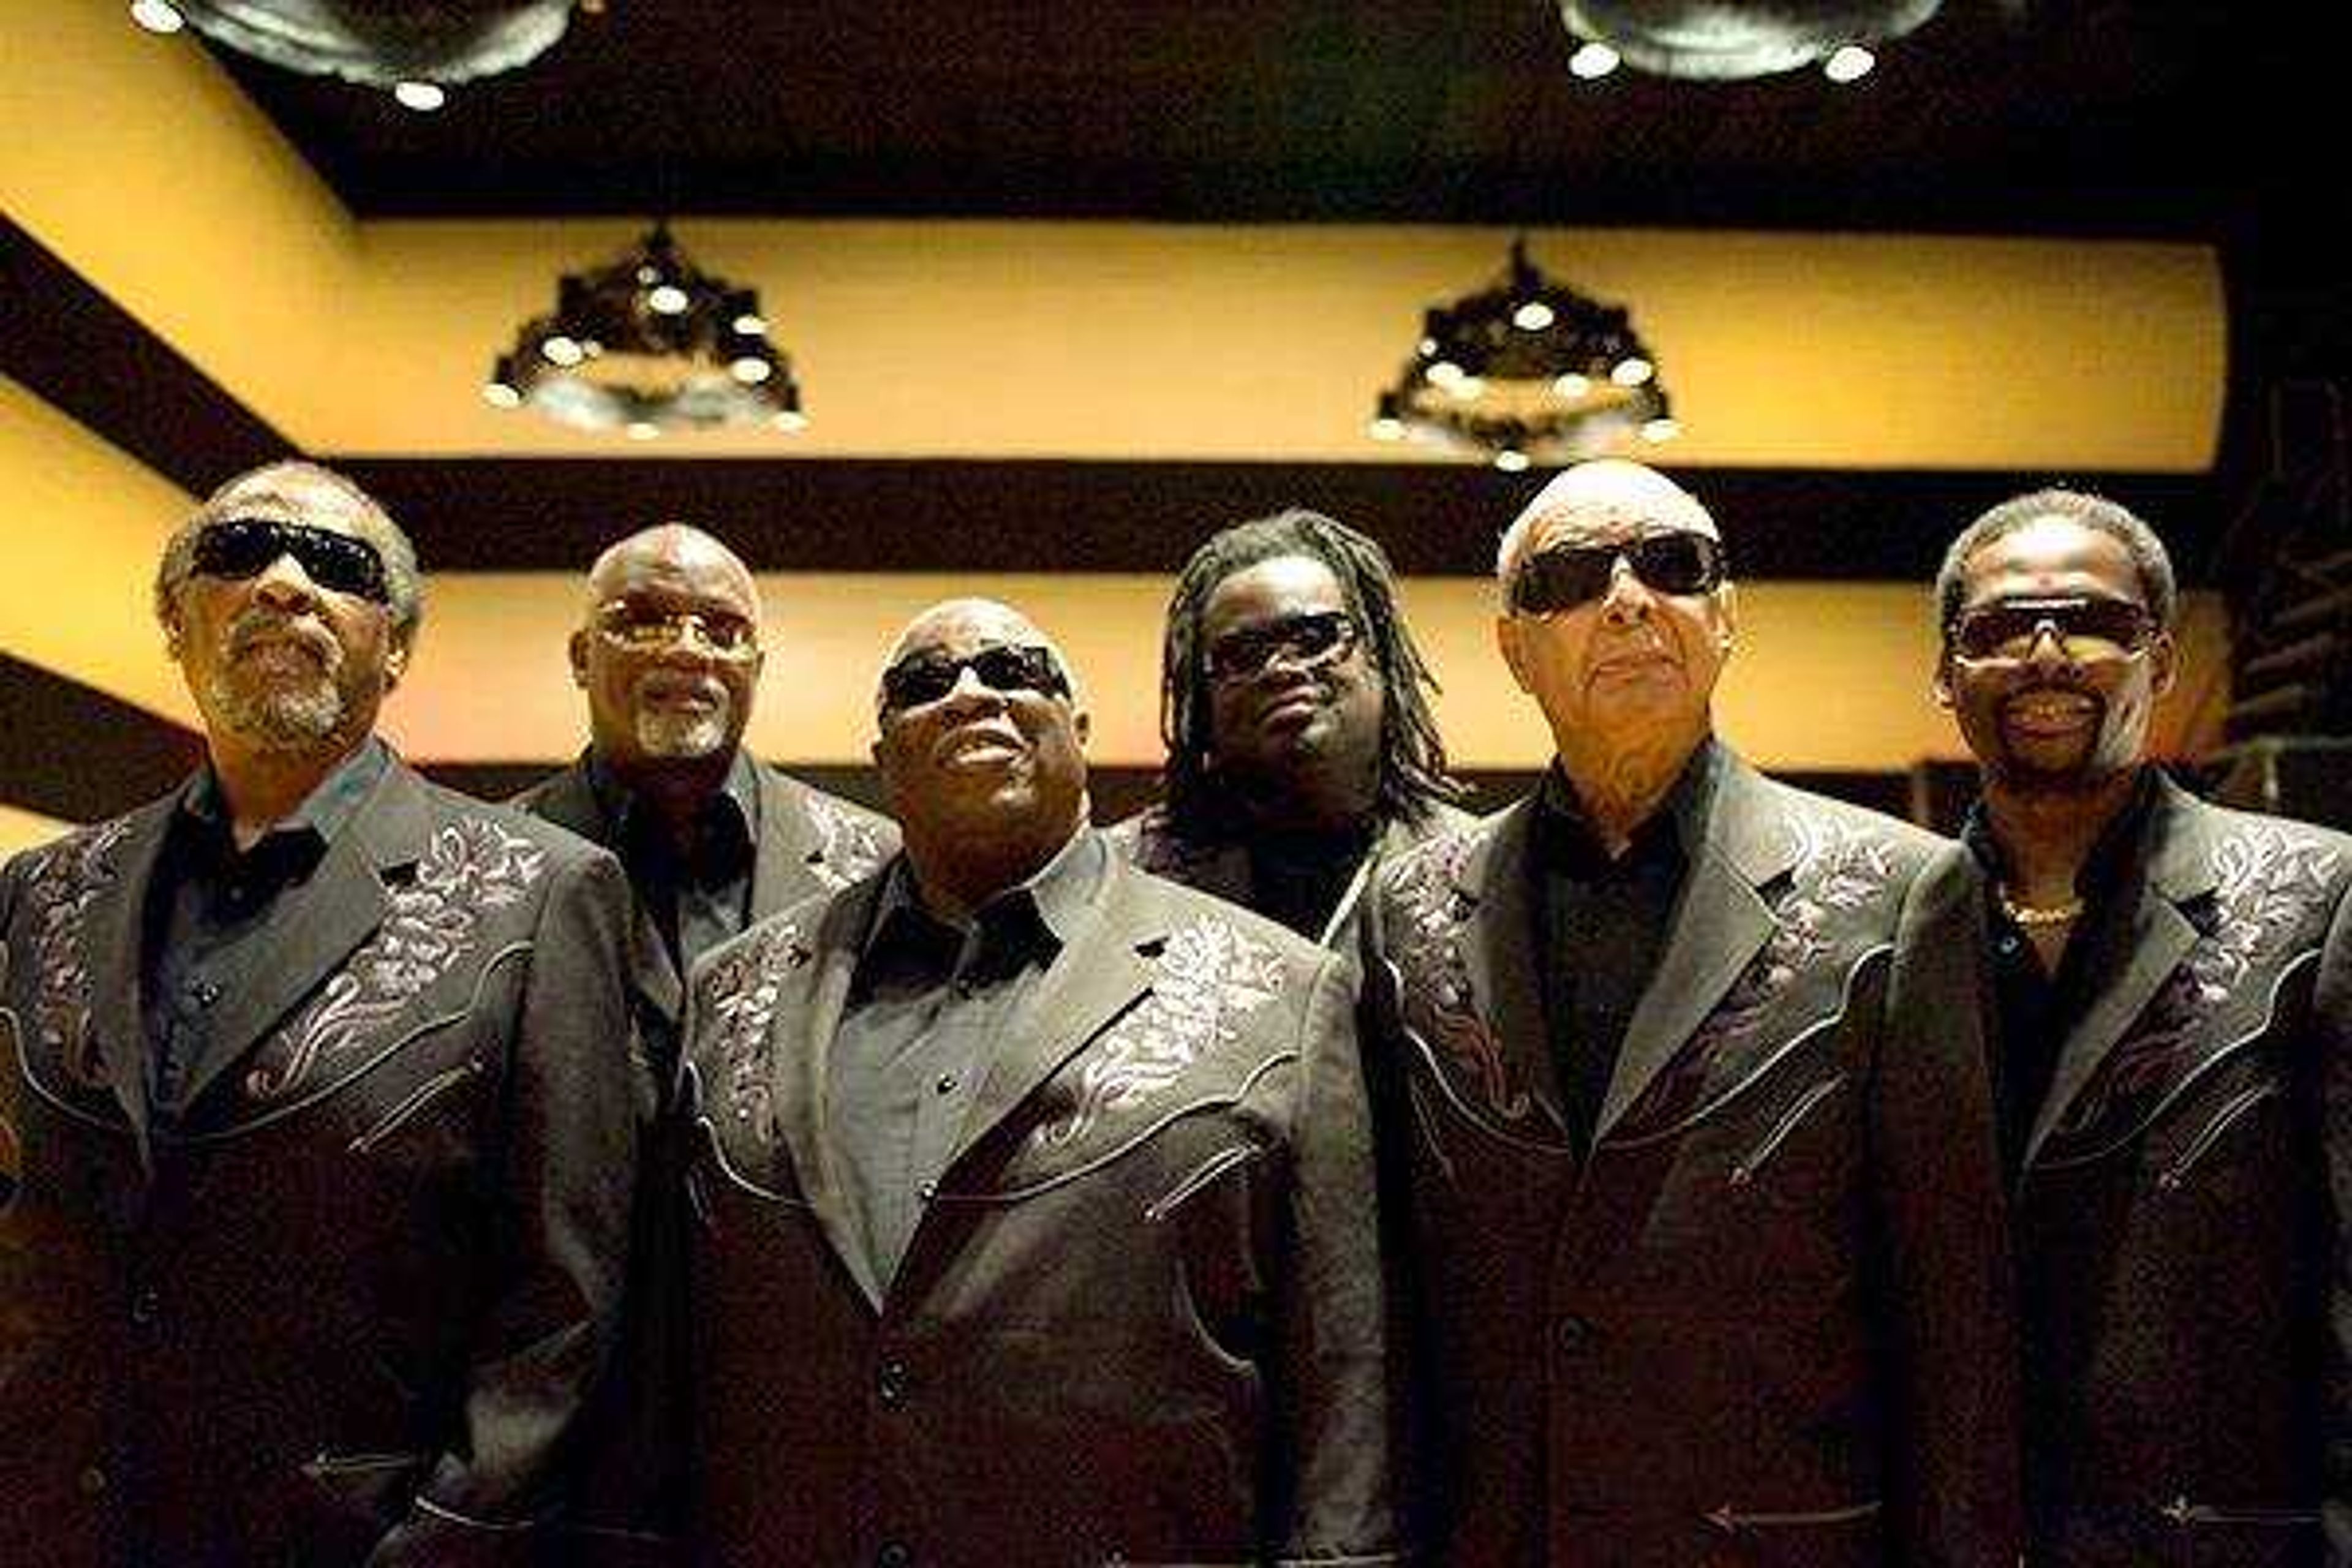 Dr. John and the Blind Boys of Alabama will bring jazz and gospel to Southeast